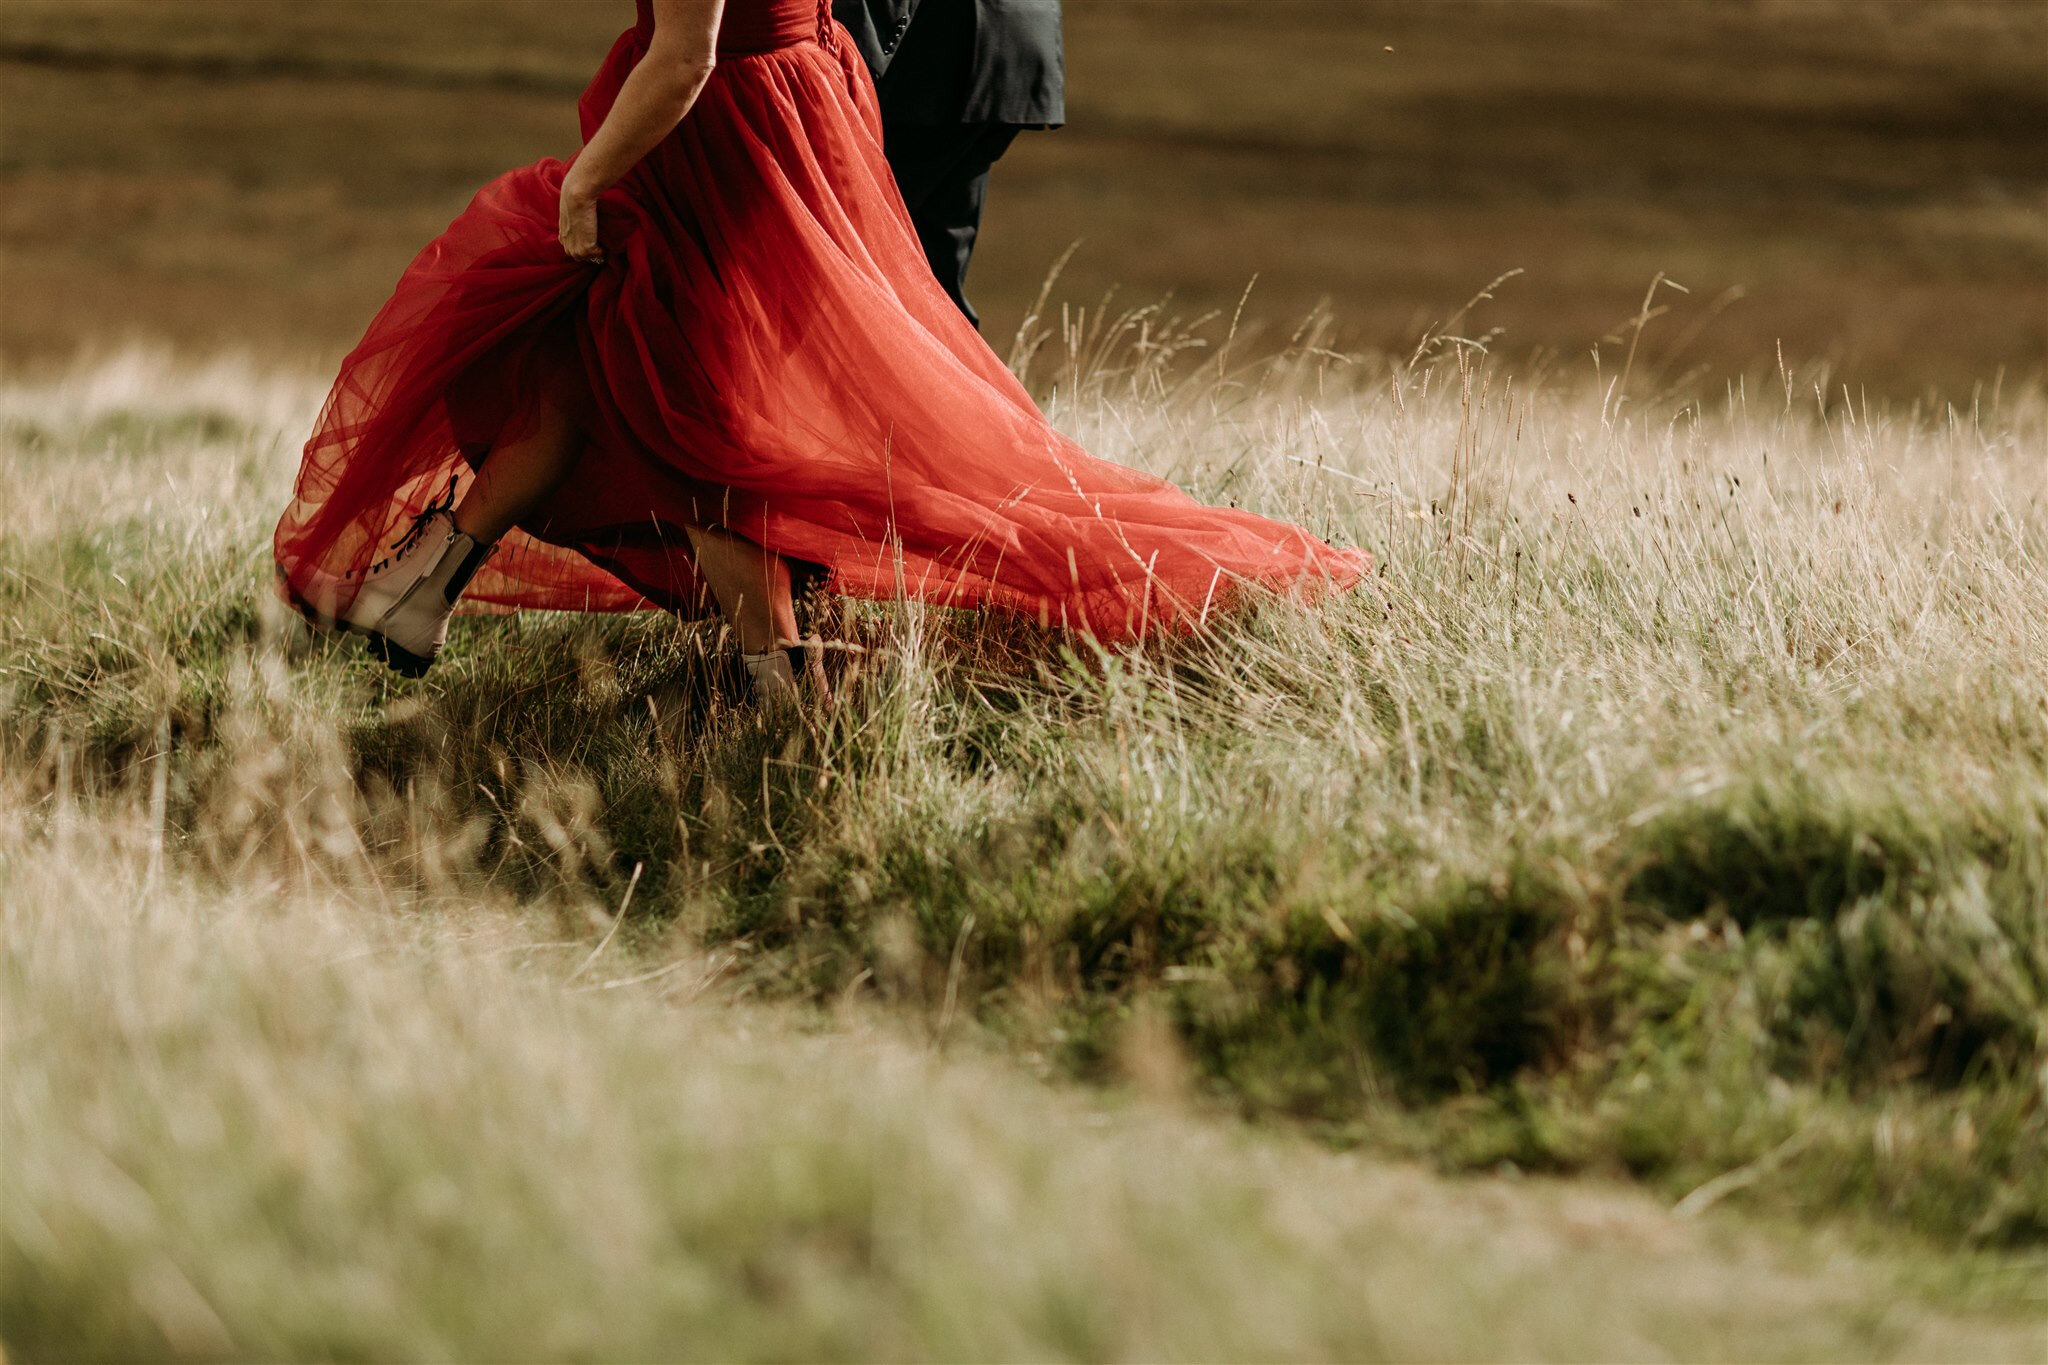 Glen Coe Scotland elopement adventure session. Bride’s red dress blows in the wind as she and her groom walk through a field in the Scottish Highlands | Adventure elopement photographer